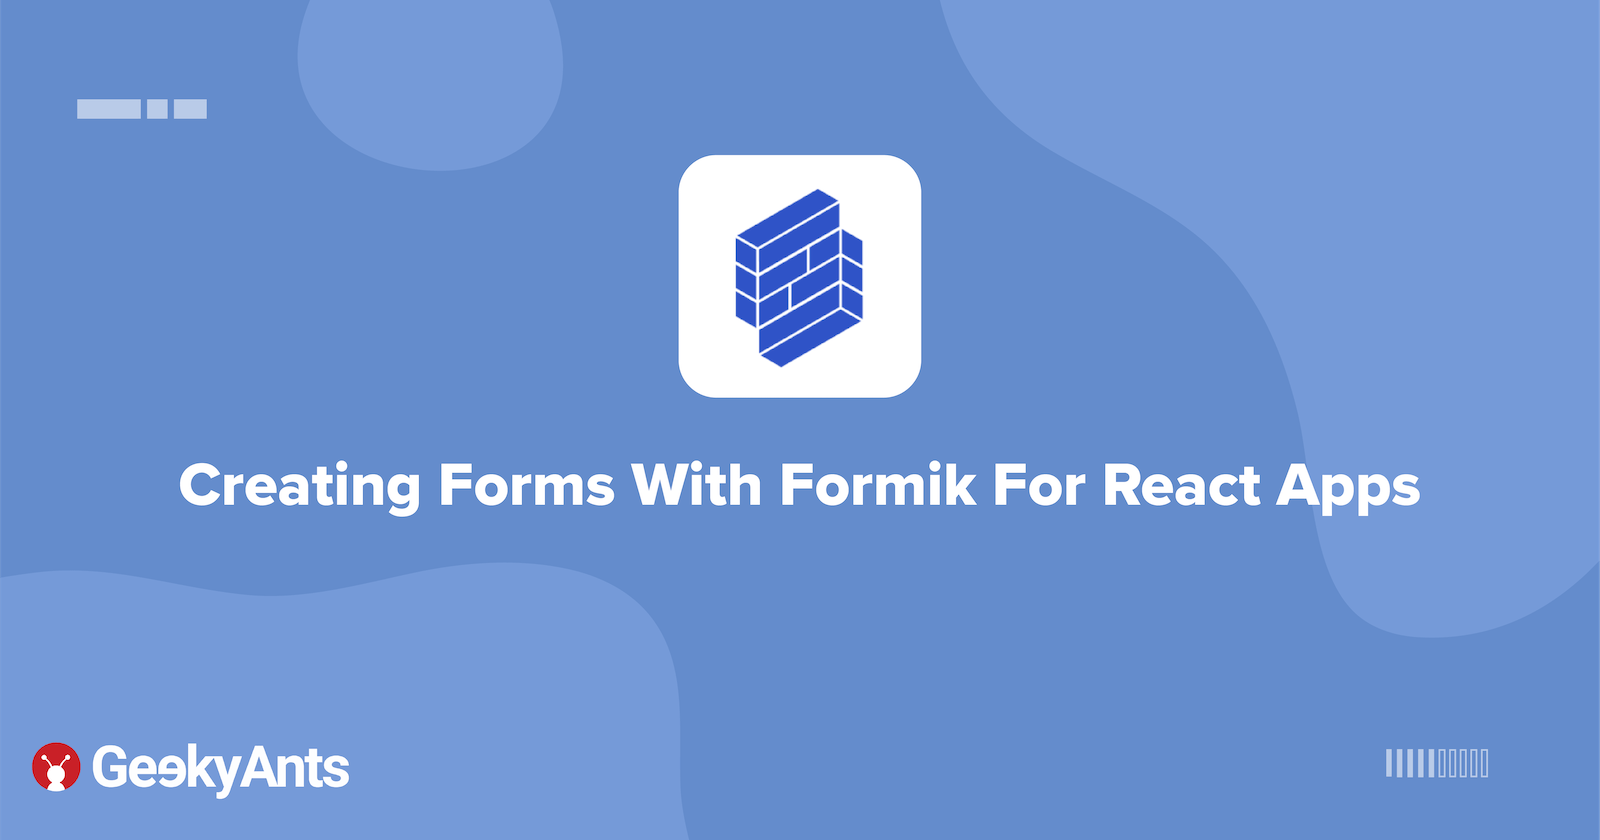 Creating a Select Field Component with Material UI, Formik, and Yup